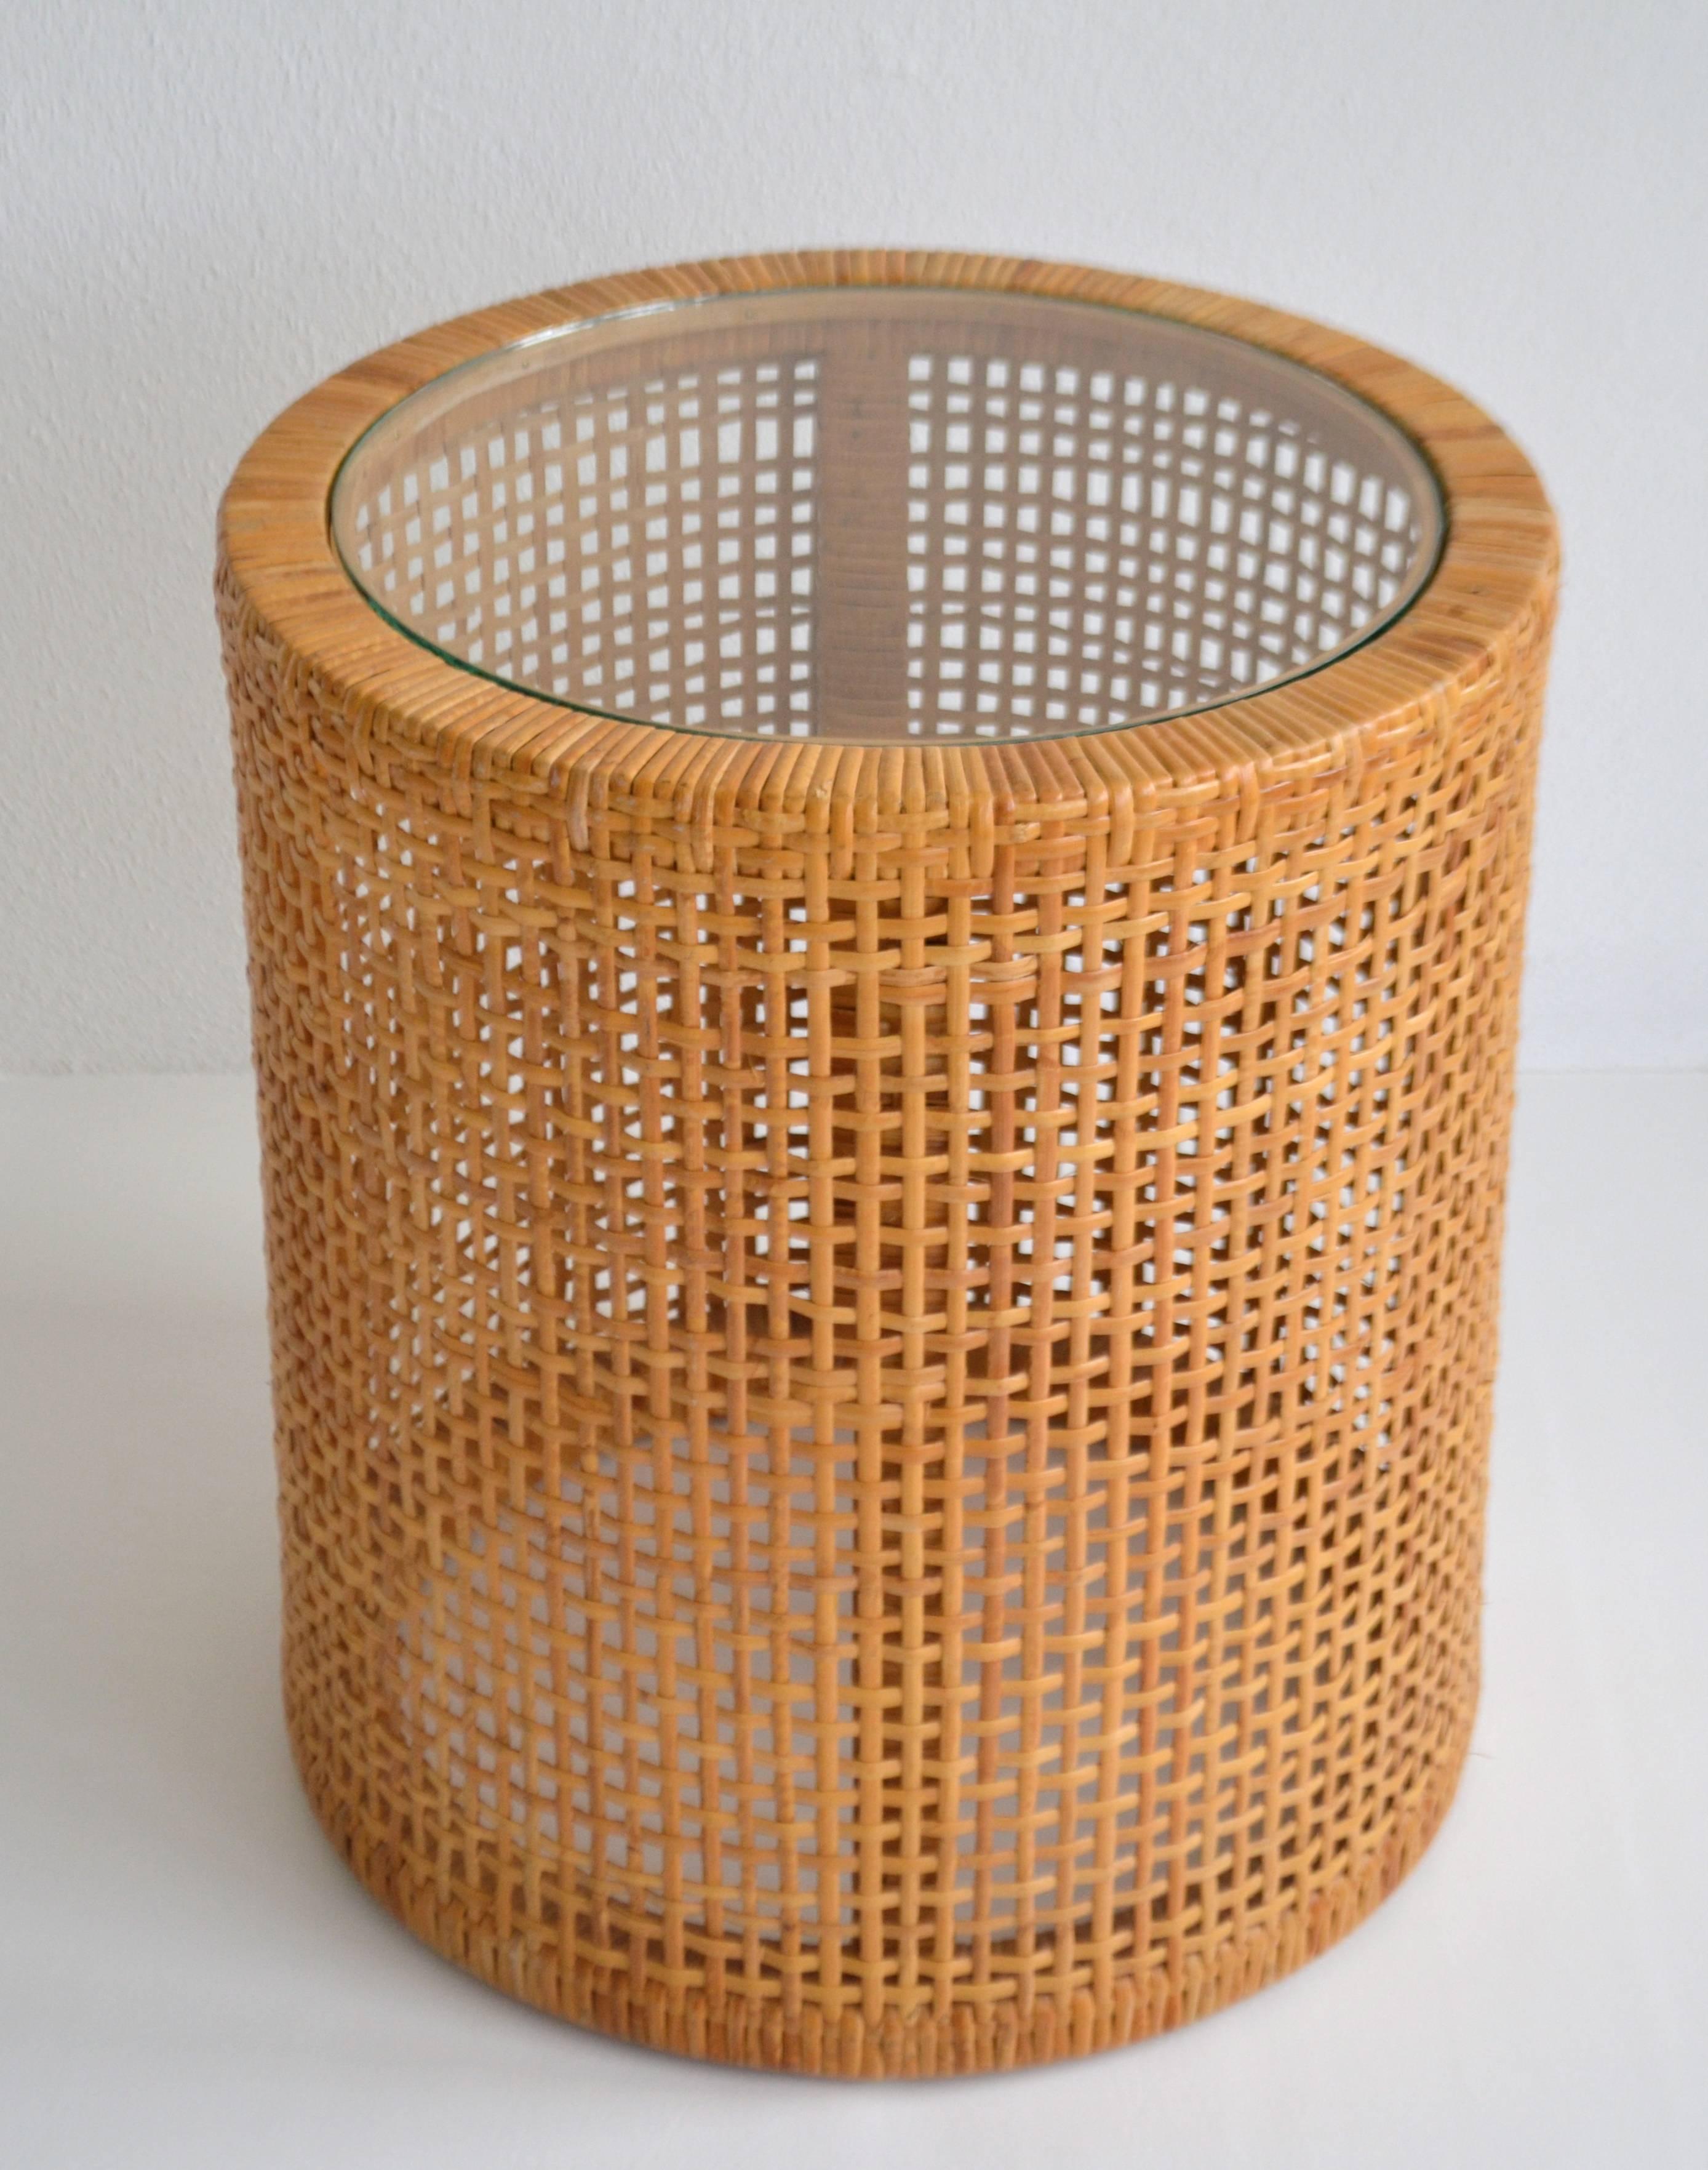 American Midcentury Woven Cane Drum Form Side Table